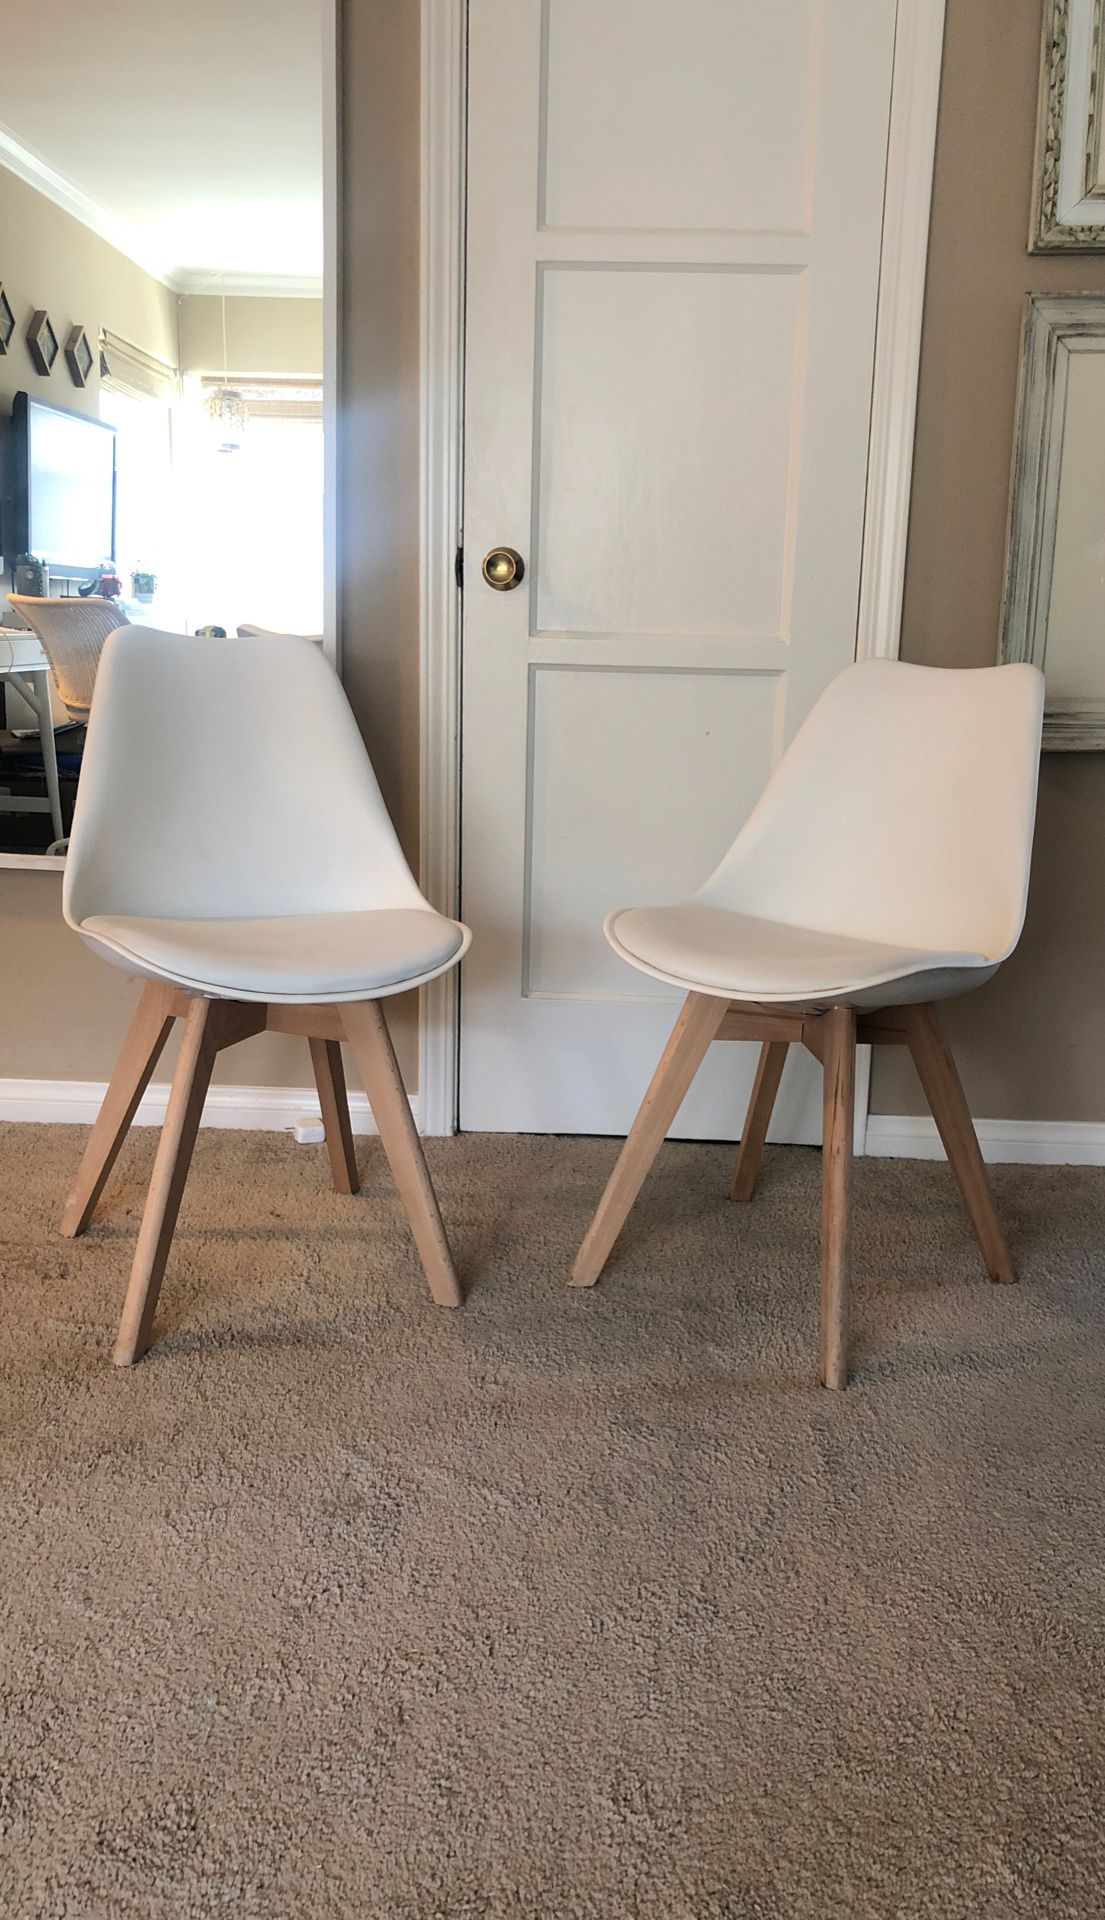 Pair of mid century modern dining chairs with white leather seat